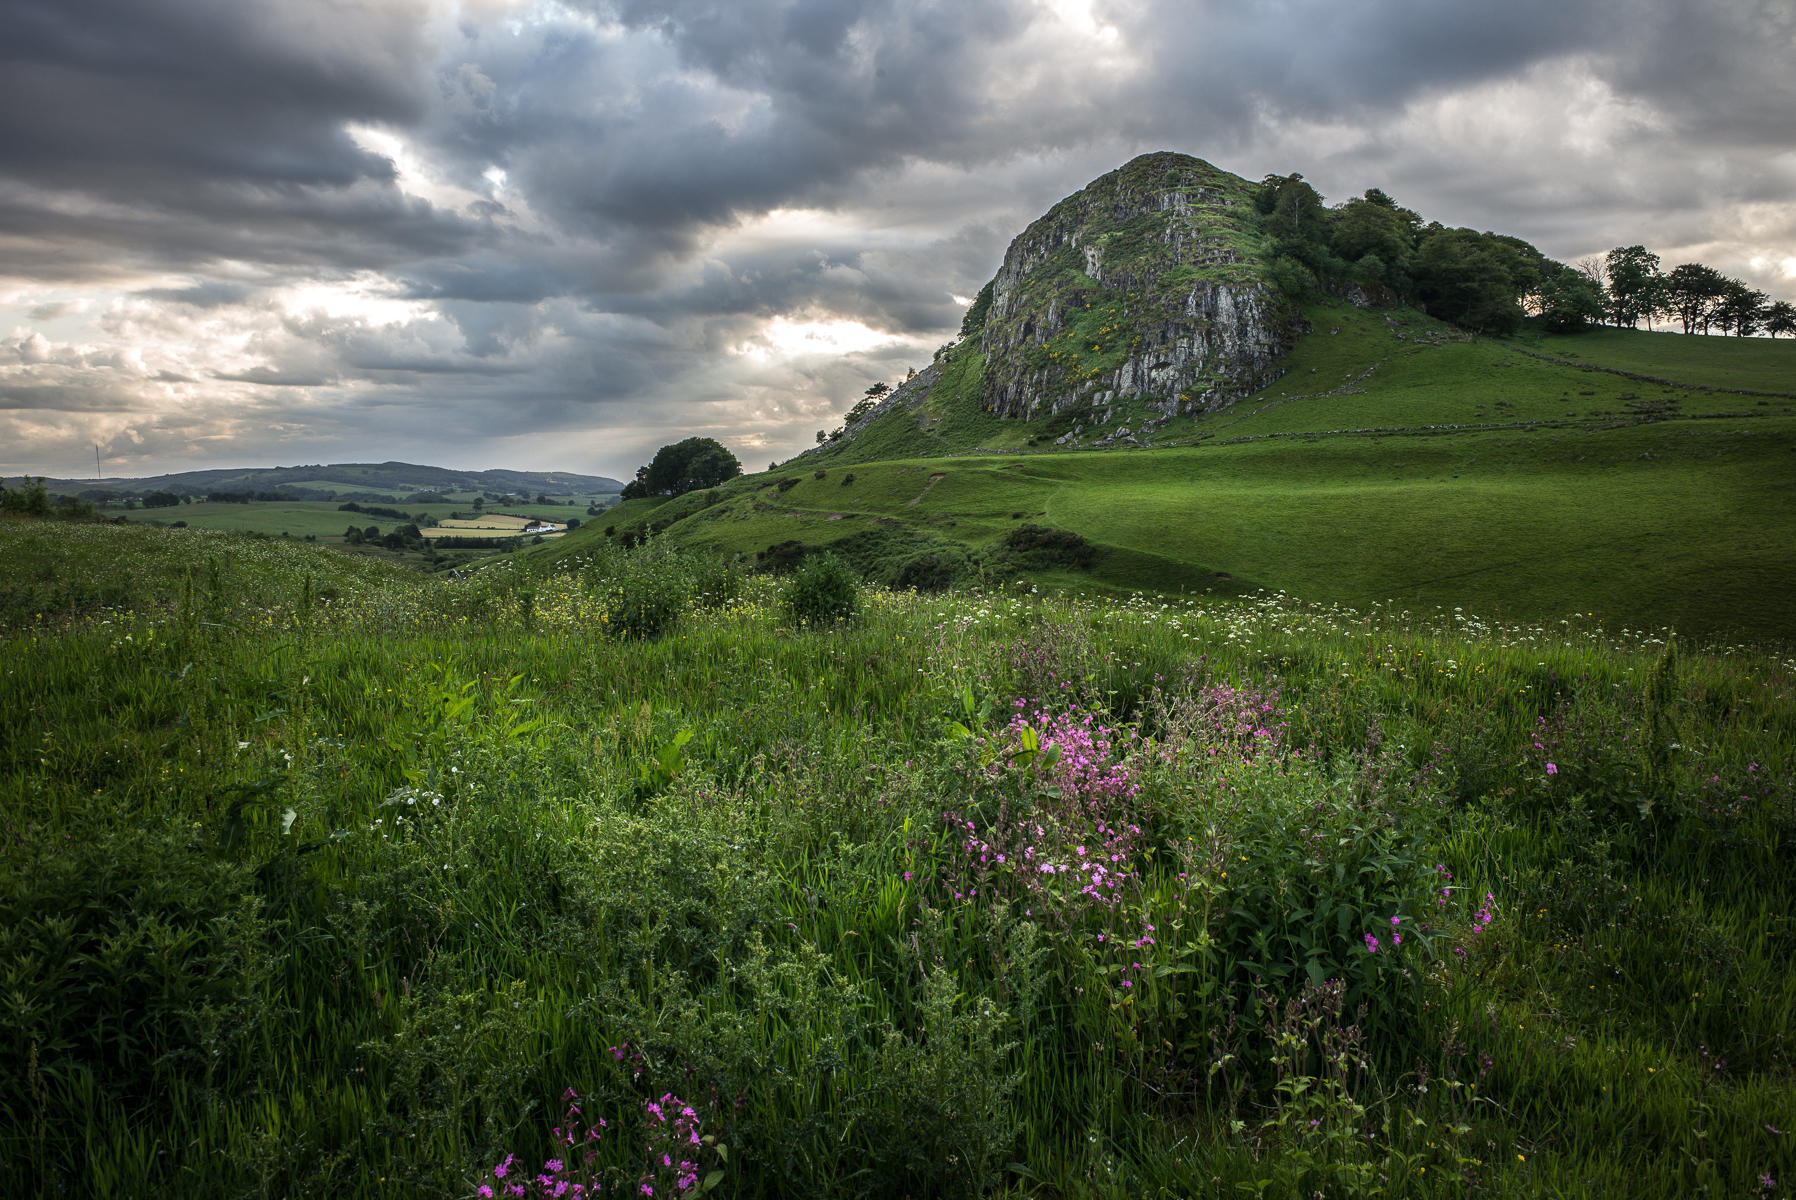 Loudon Hill, Scotland.  
This is a volcanic plug and the site of a victorious battle led by William Wallace during the Wars for Scottish Independence in 1307